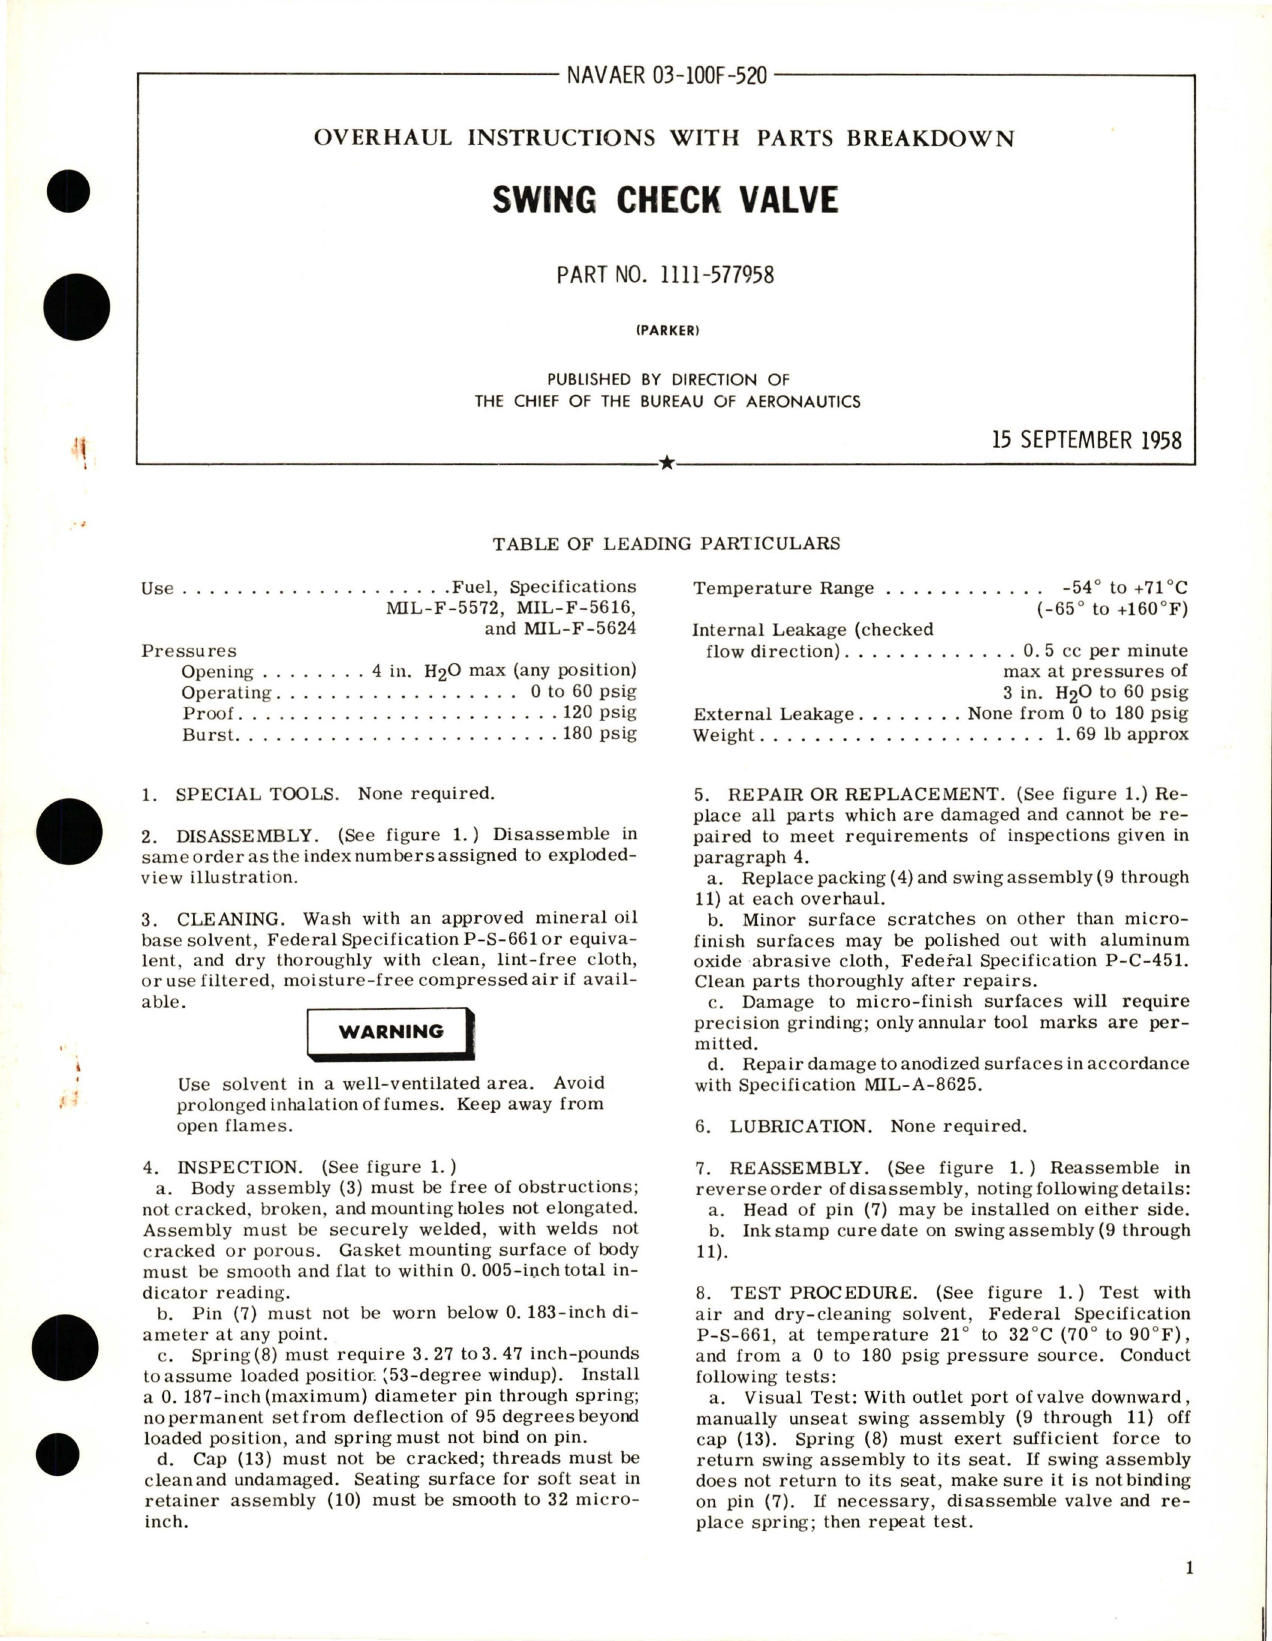 Sample page 1 from AirCorps Library document: Overhaul Instructions with Parts Breakdown for Swing Check Valve - Part 1111-577958 